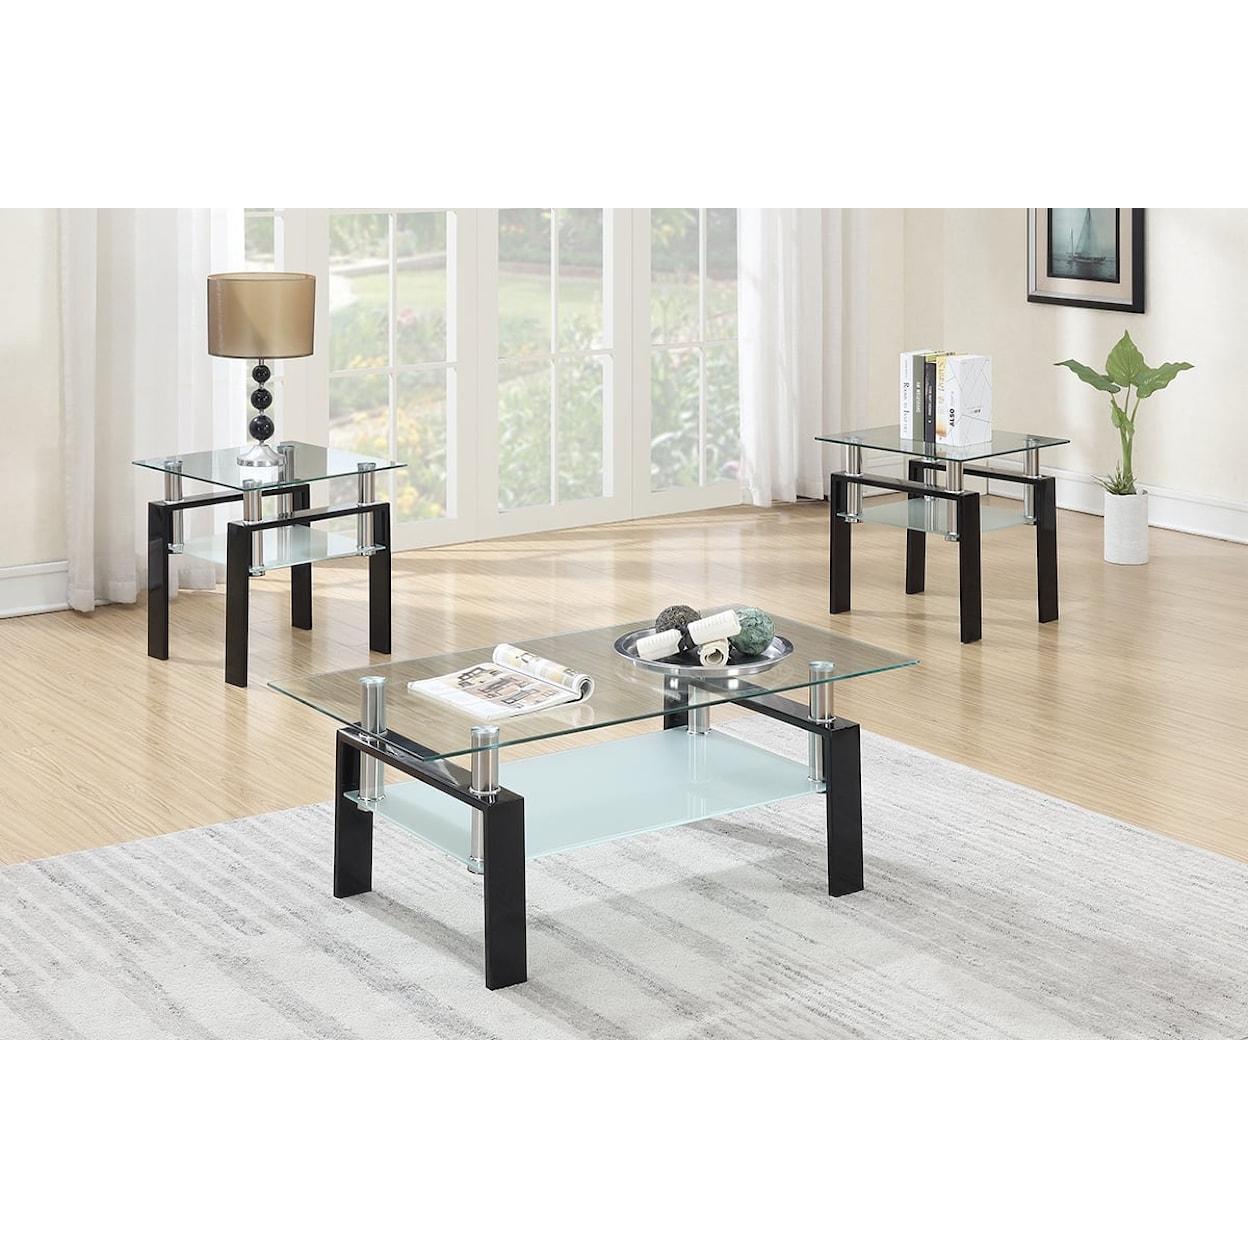 Poundex Occasional Tables 3 PC OCCASIONAL SET BLACK & GLASS |